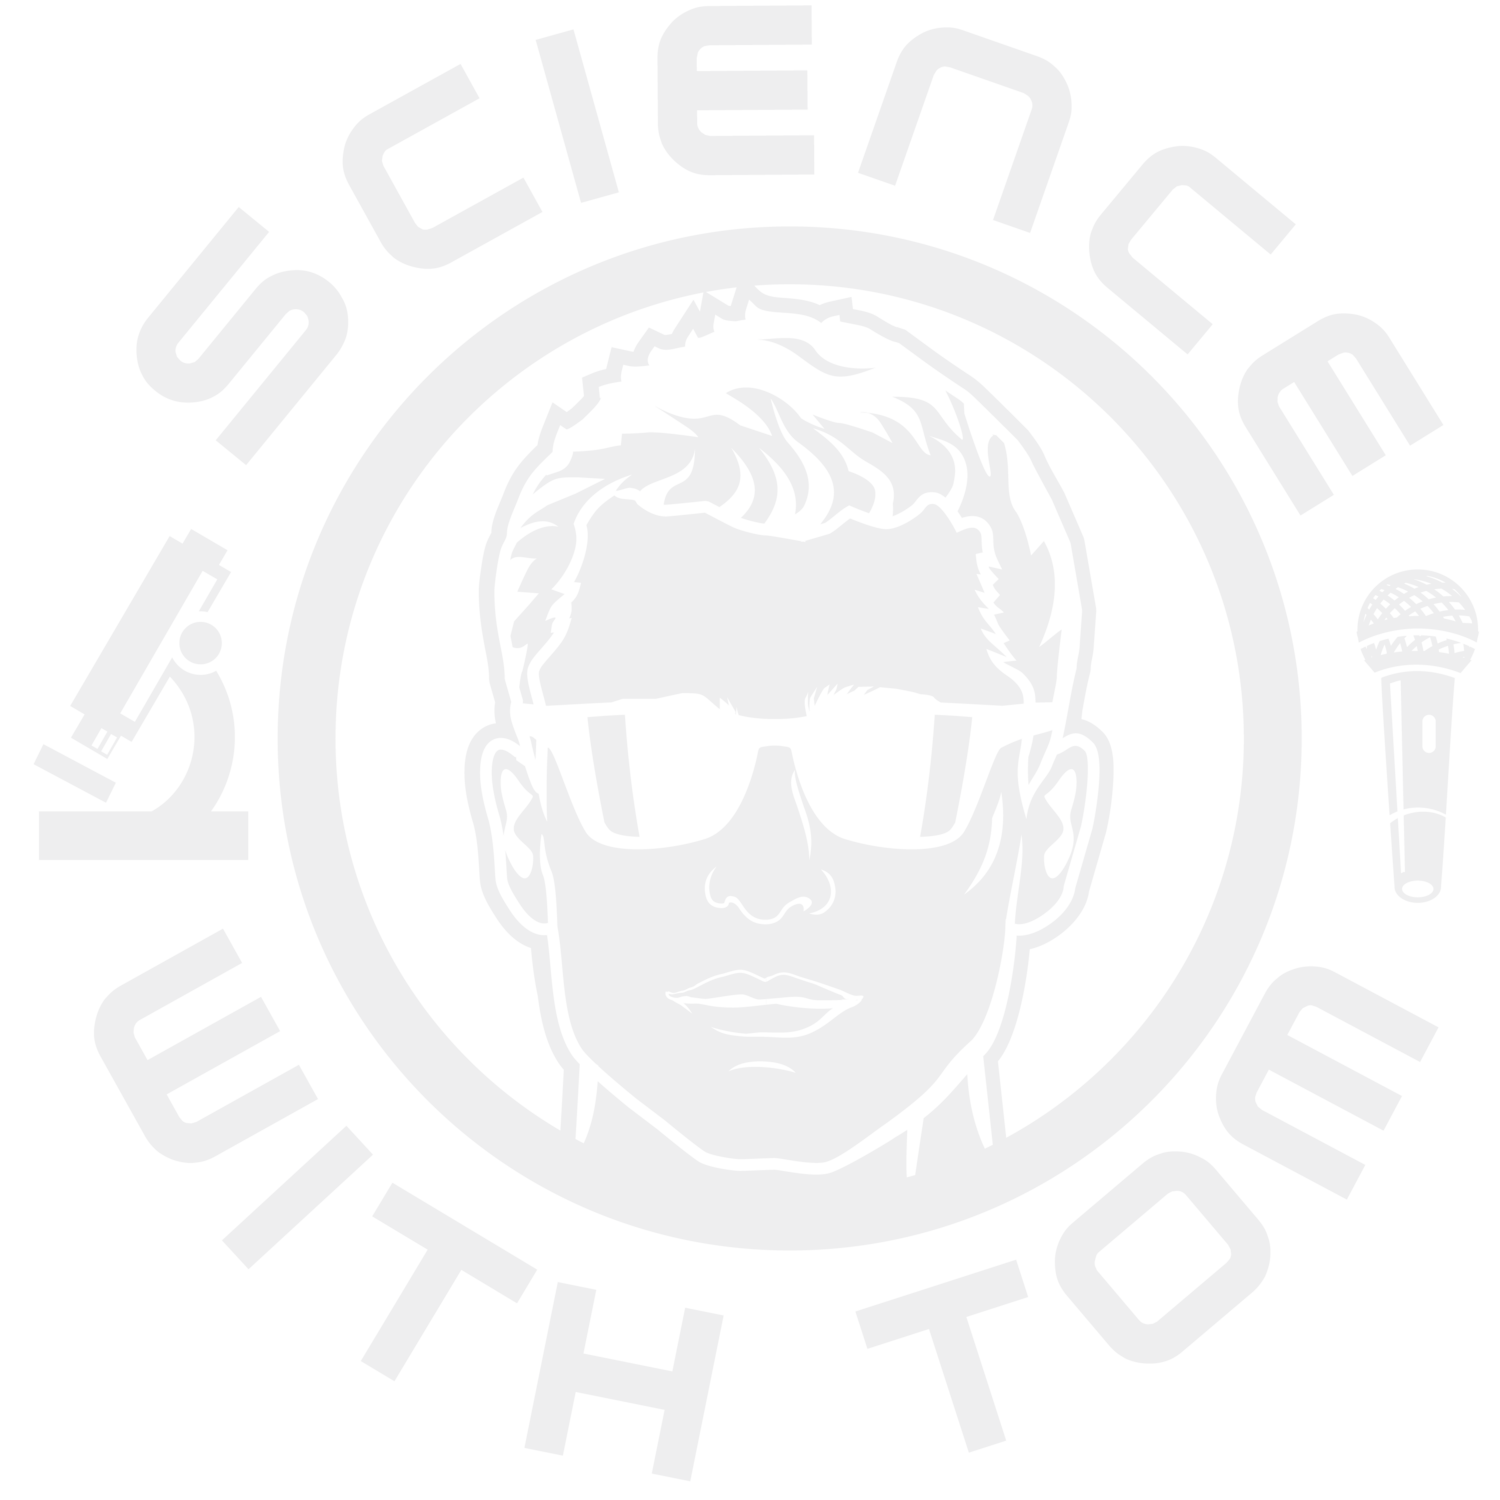 Science With Tom